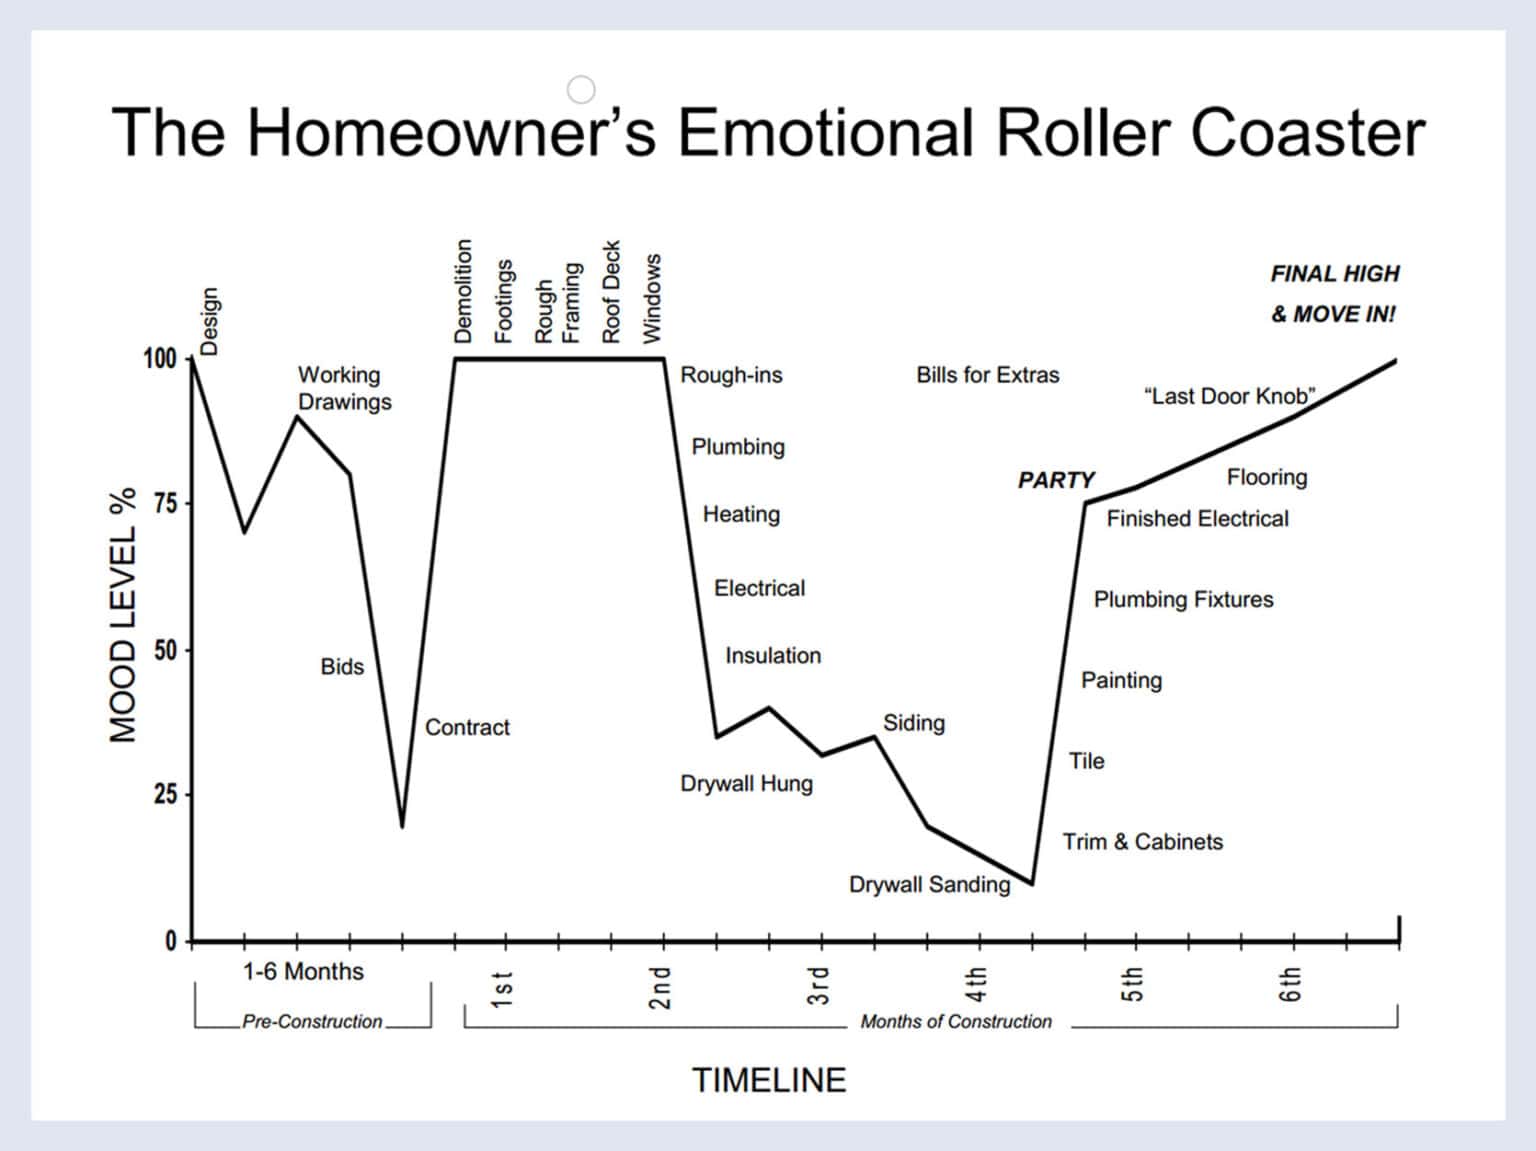 A bar graph illustrating the emotional highs and lows of home remodeling